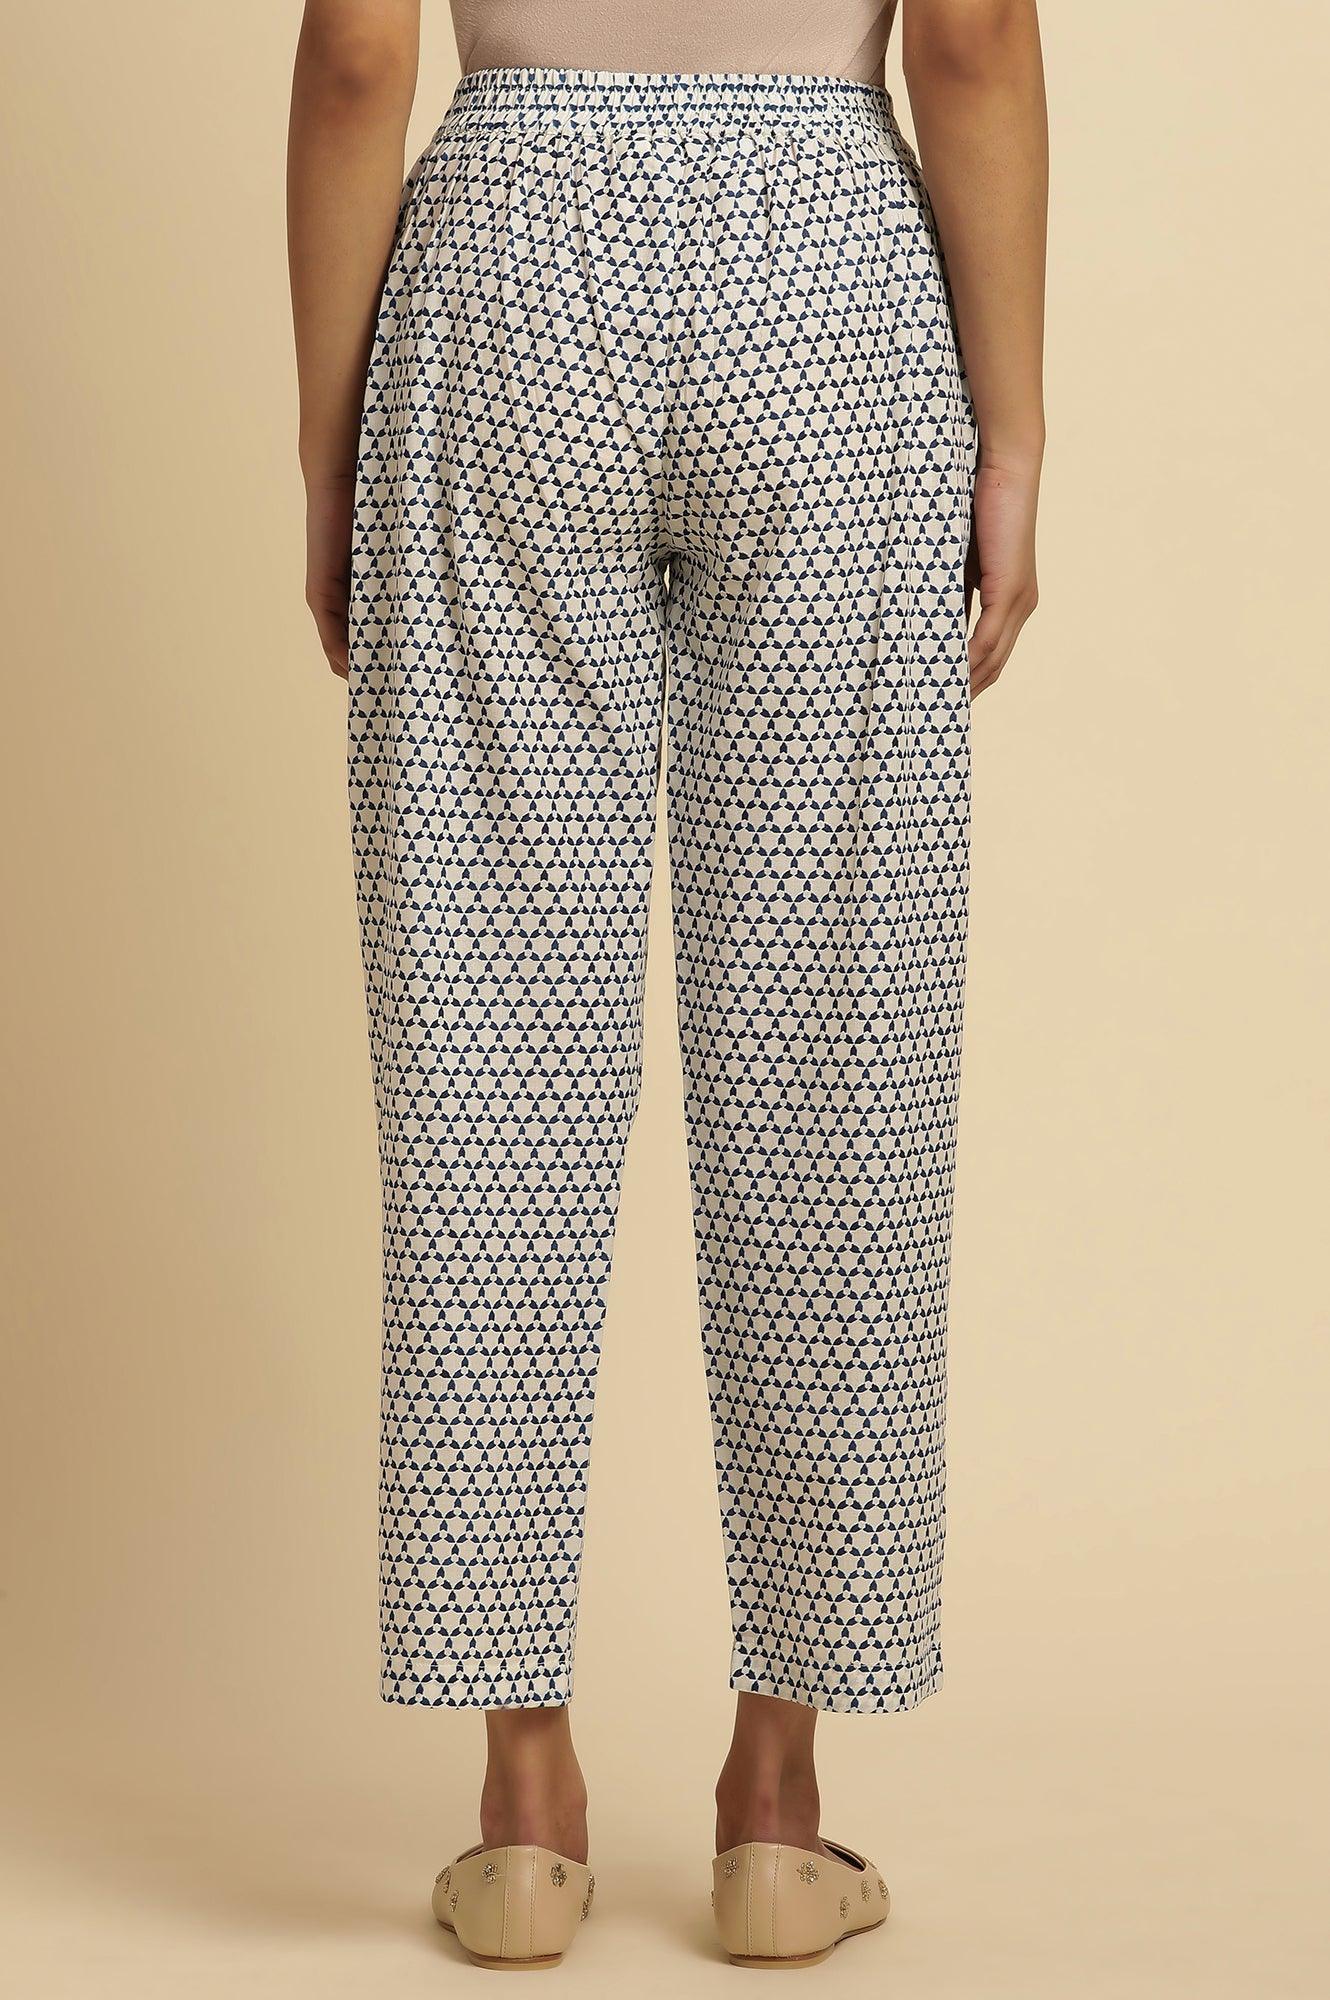 White Straight Pants With Blue Triangle Print - wforwoman